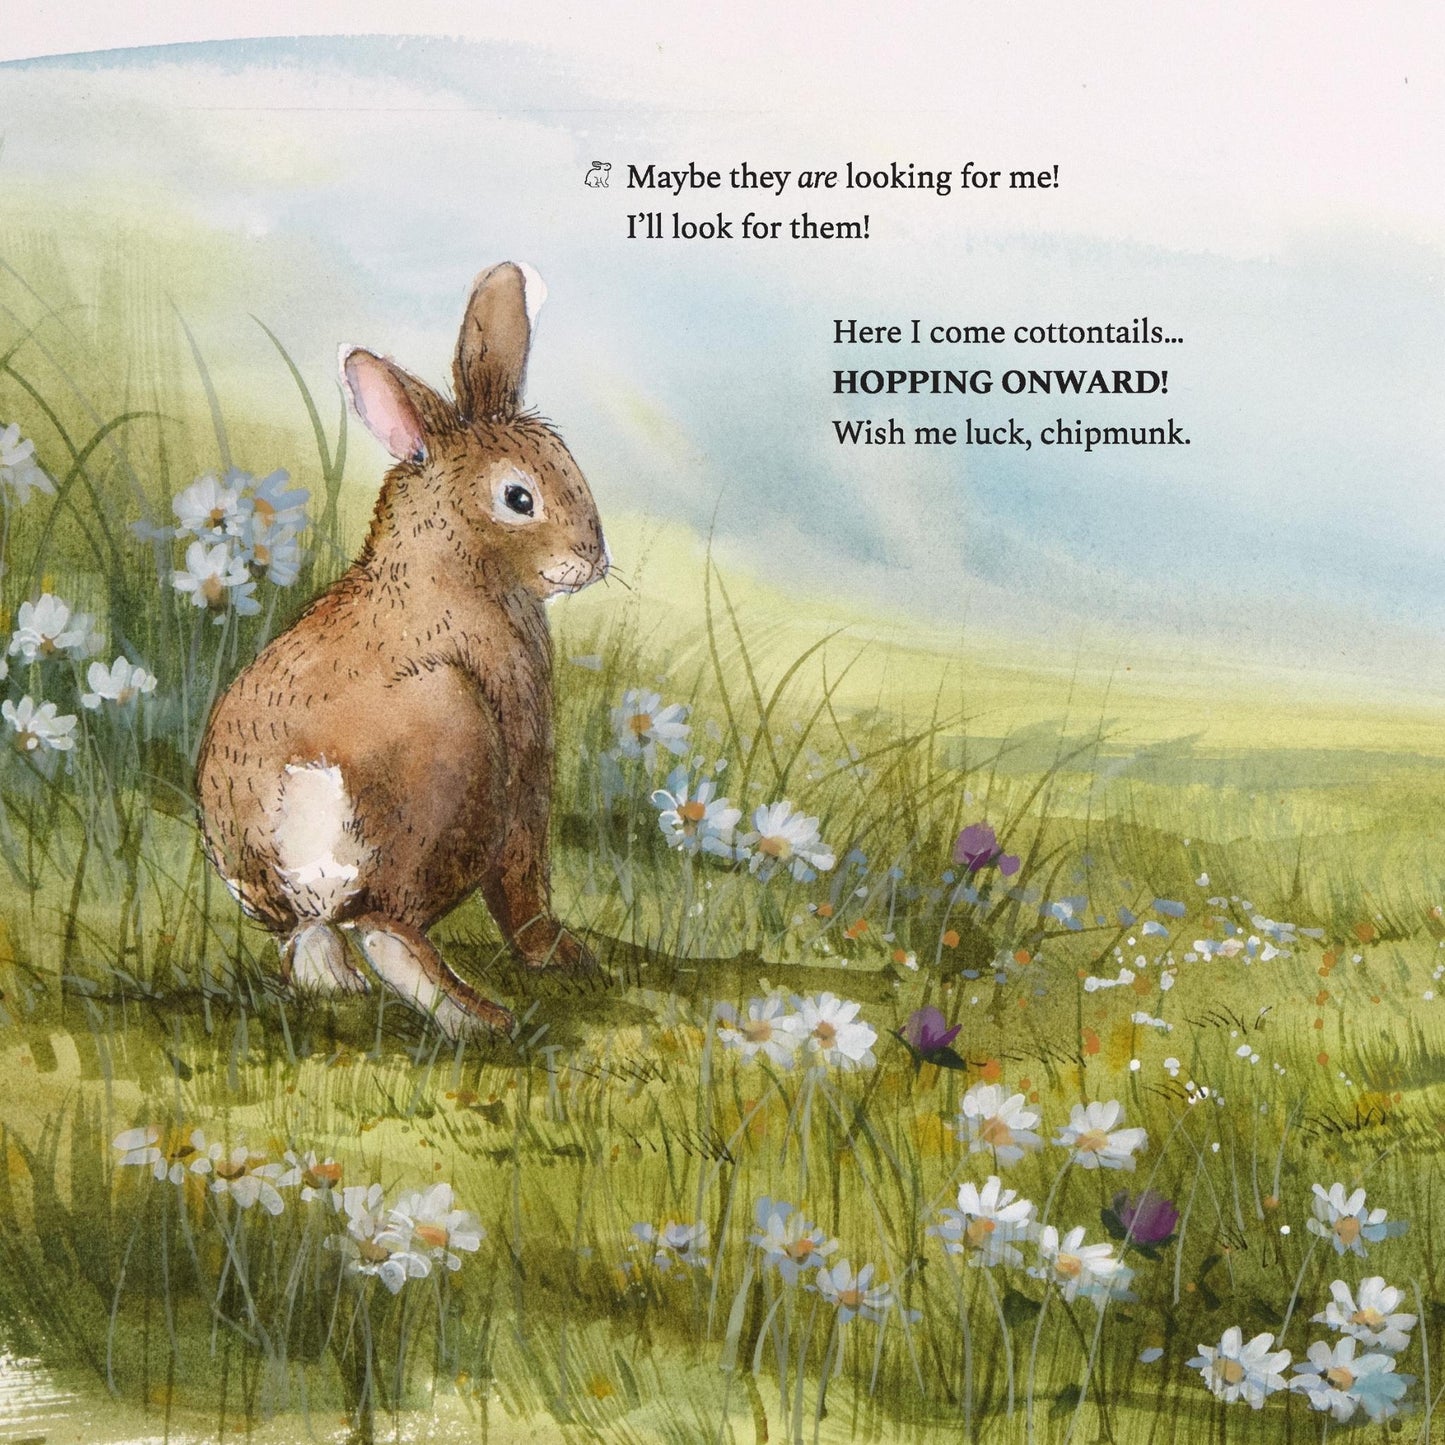 New England Cottontail Rabbit will hop onward, page from book